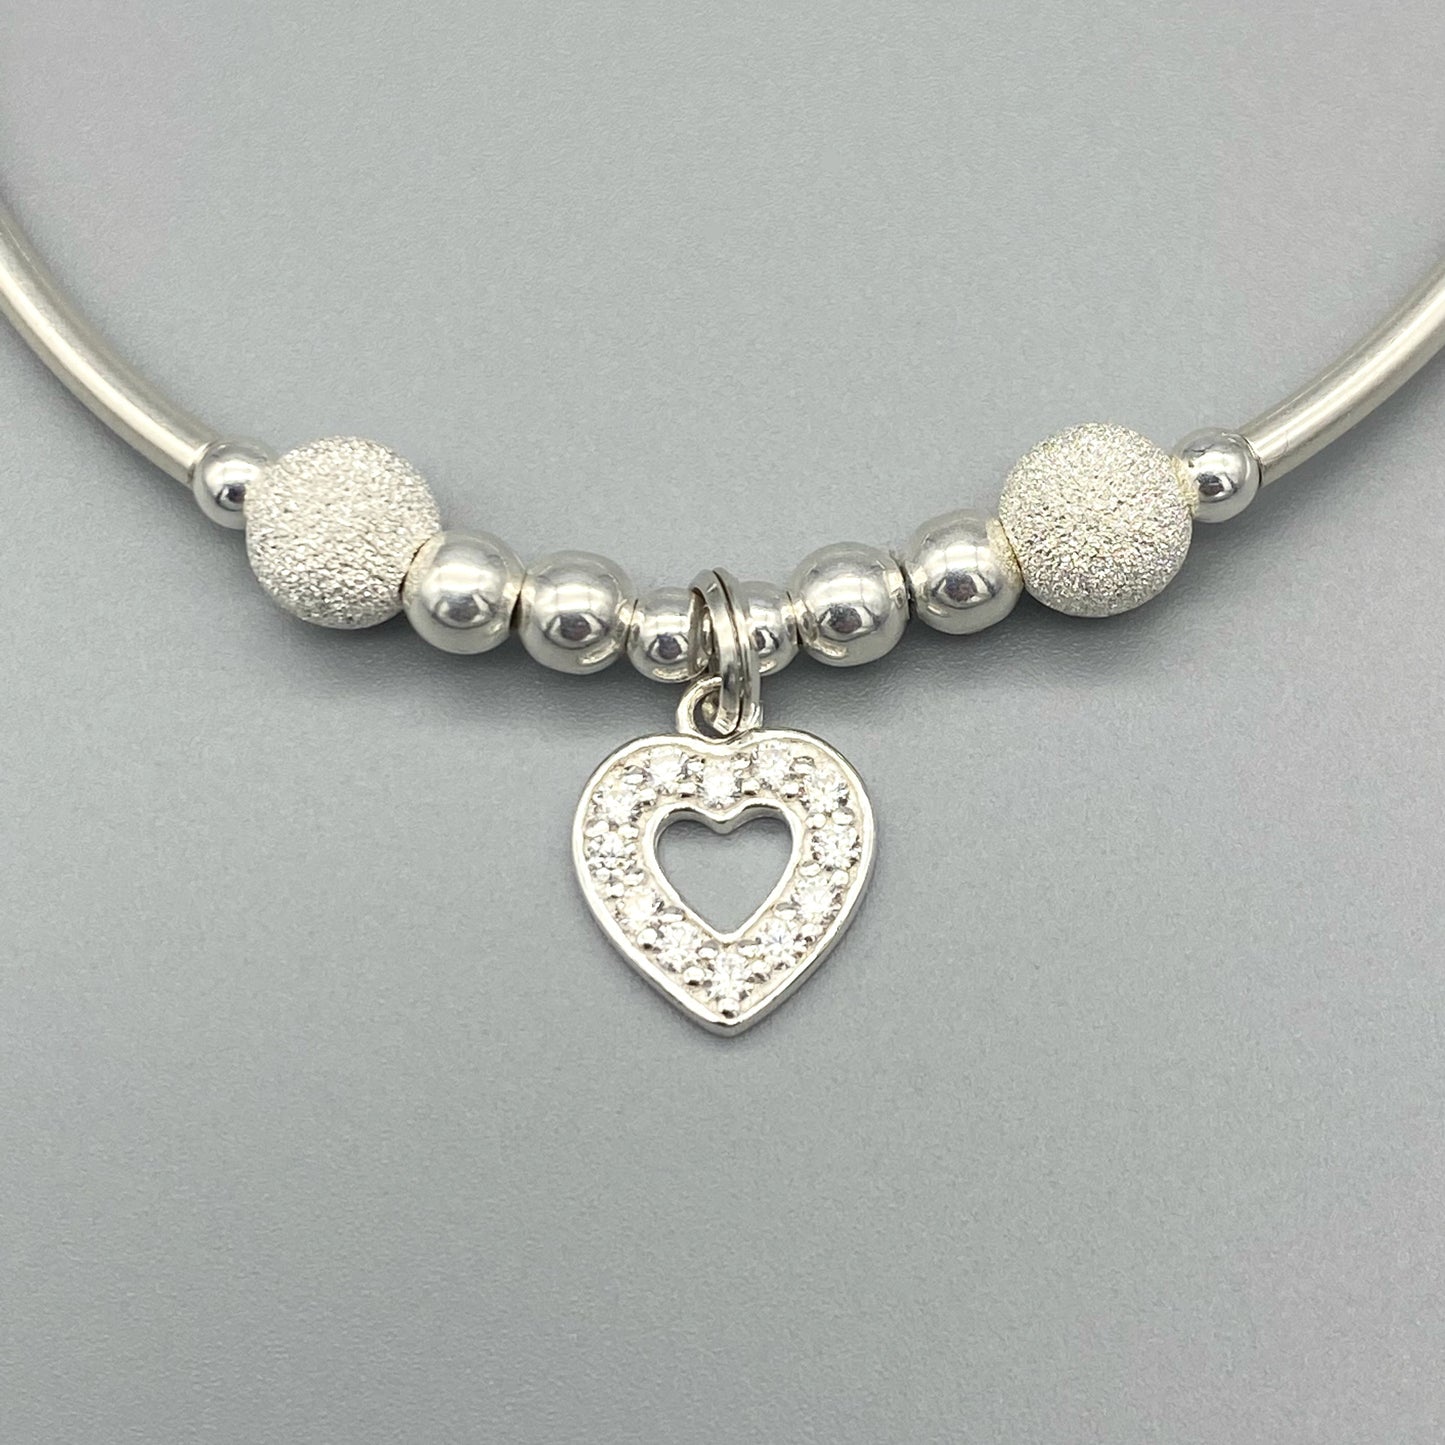 Diamond heart charm sterling silver stacking bracelet by My Silver Wish